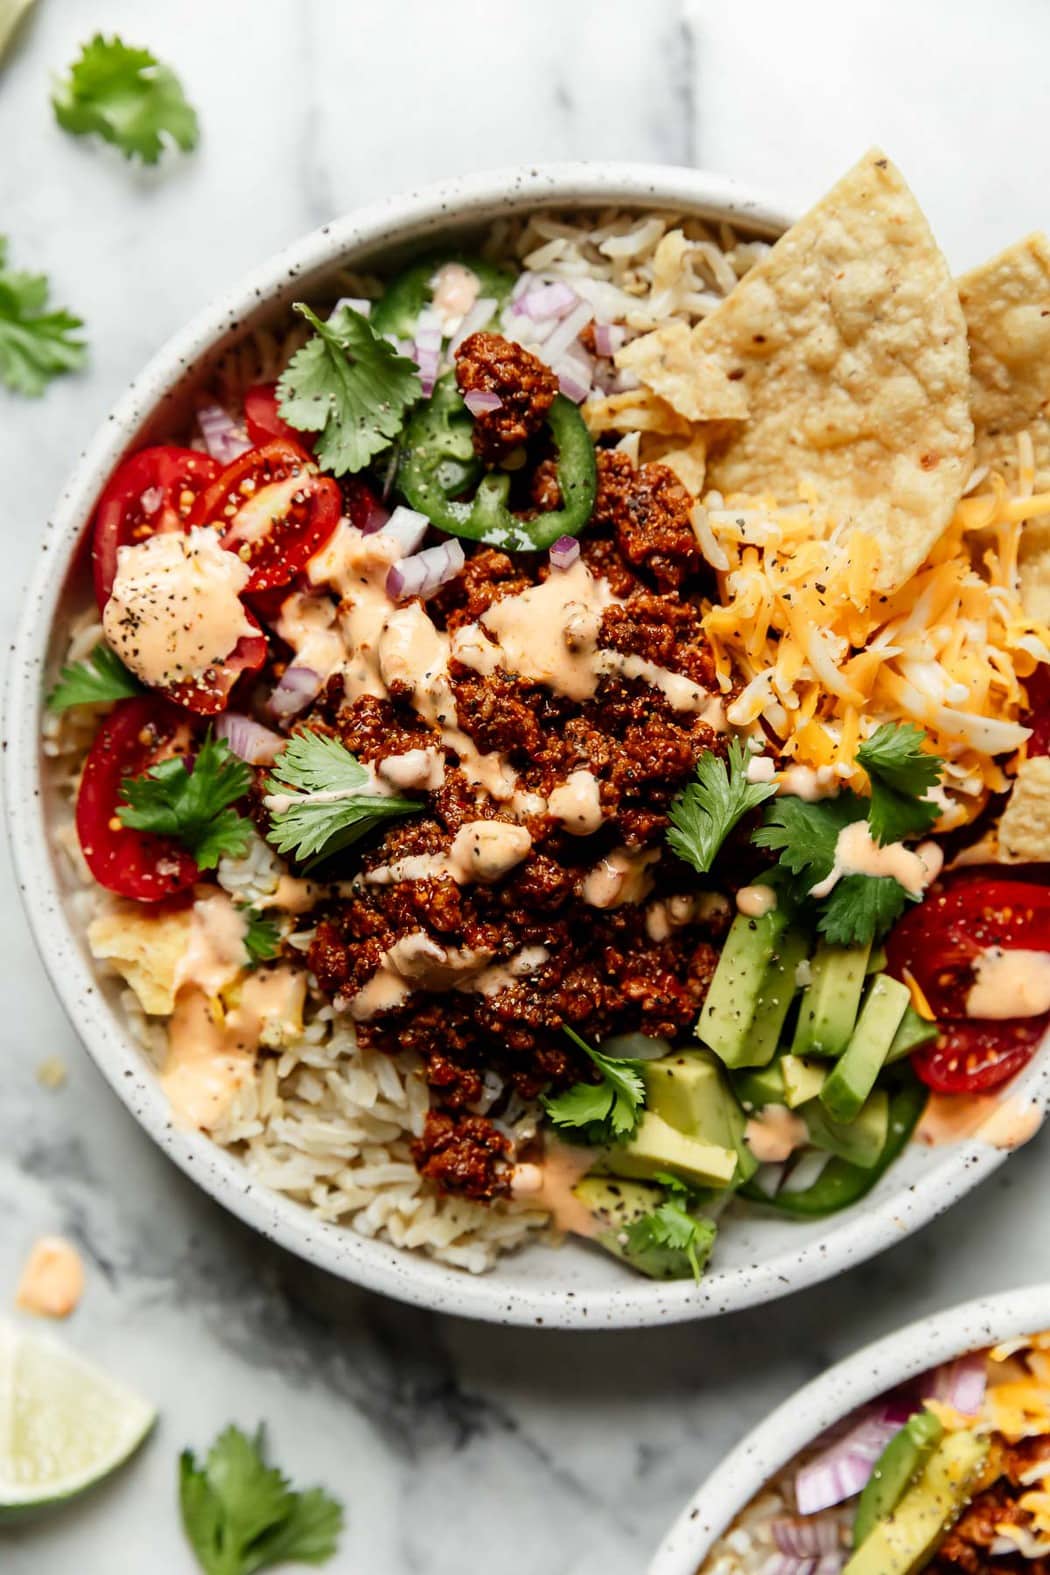 https://therealfooddietitians.com/wp-content/uploads/2021/08/Easy-Beef-Taco-Bowls-with-Salsa-Ranch-7.jpg